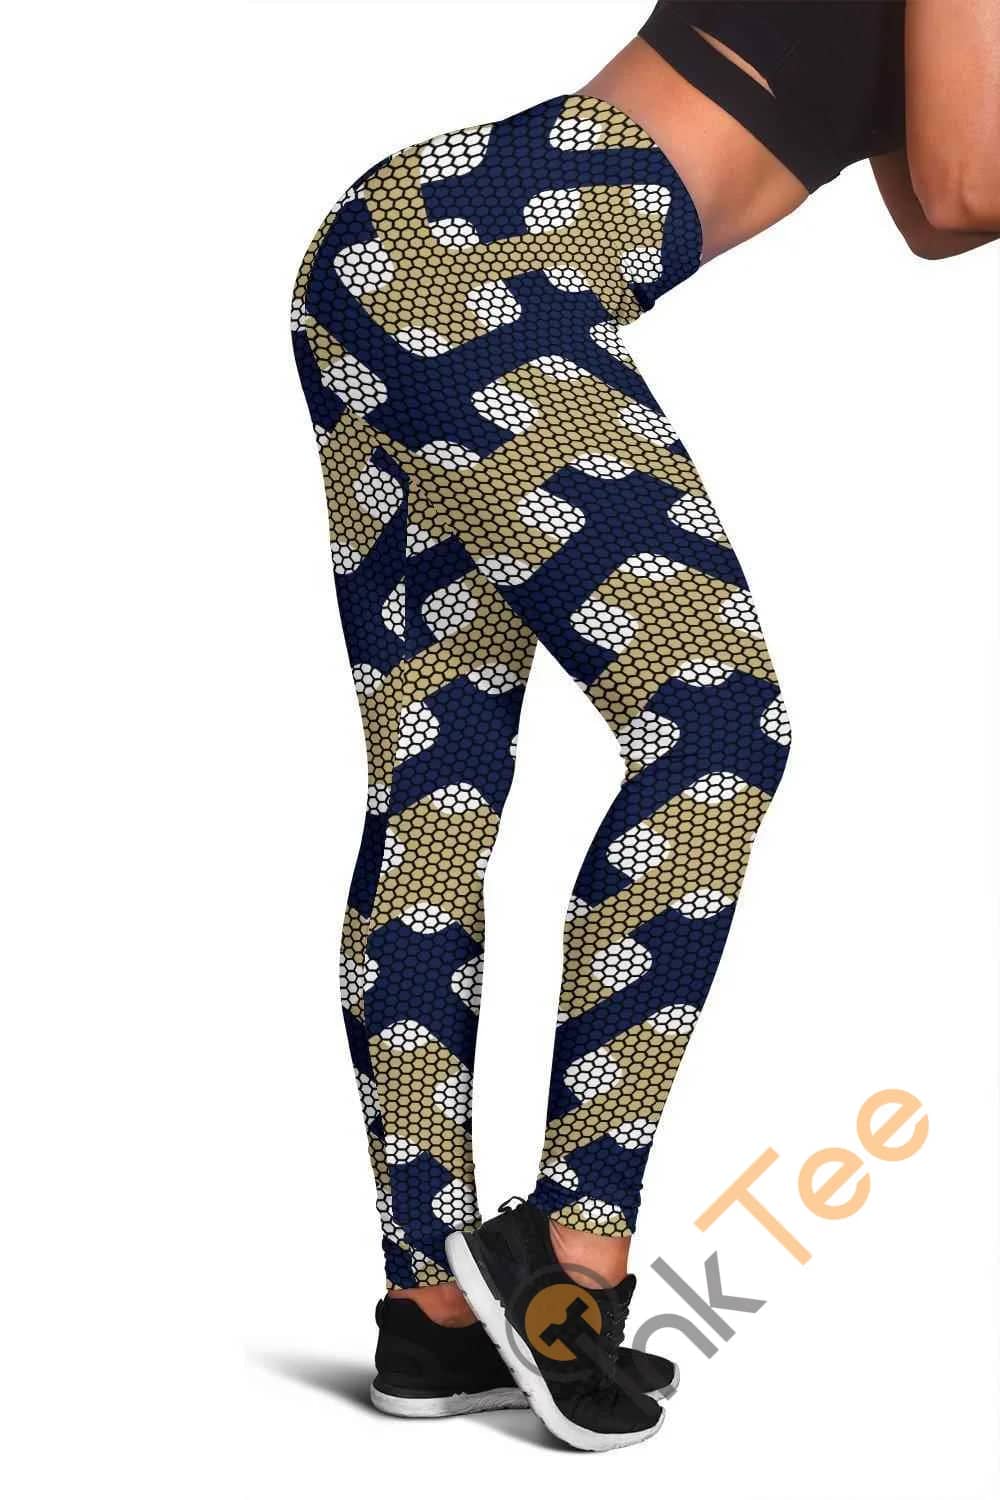 Pitt Panthers Inspired Liberty 3D All Over Print For Yoga Fitness Fashion Women's Leggings